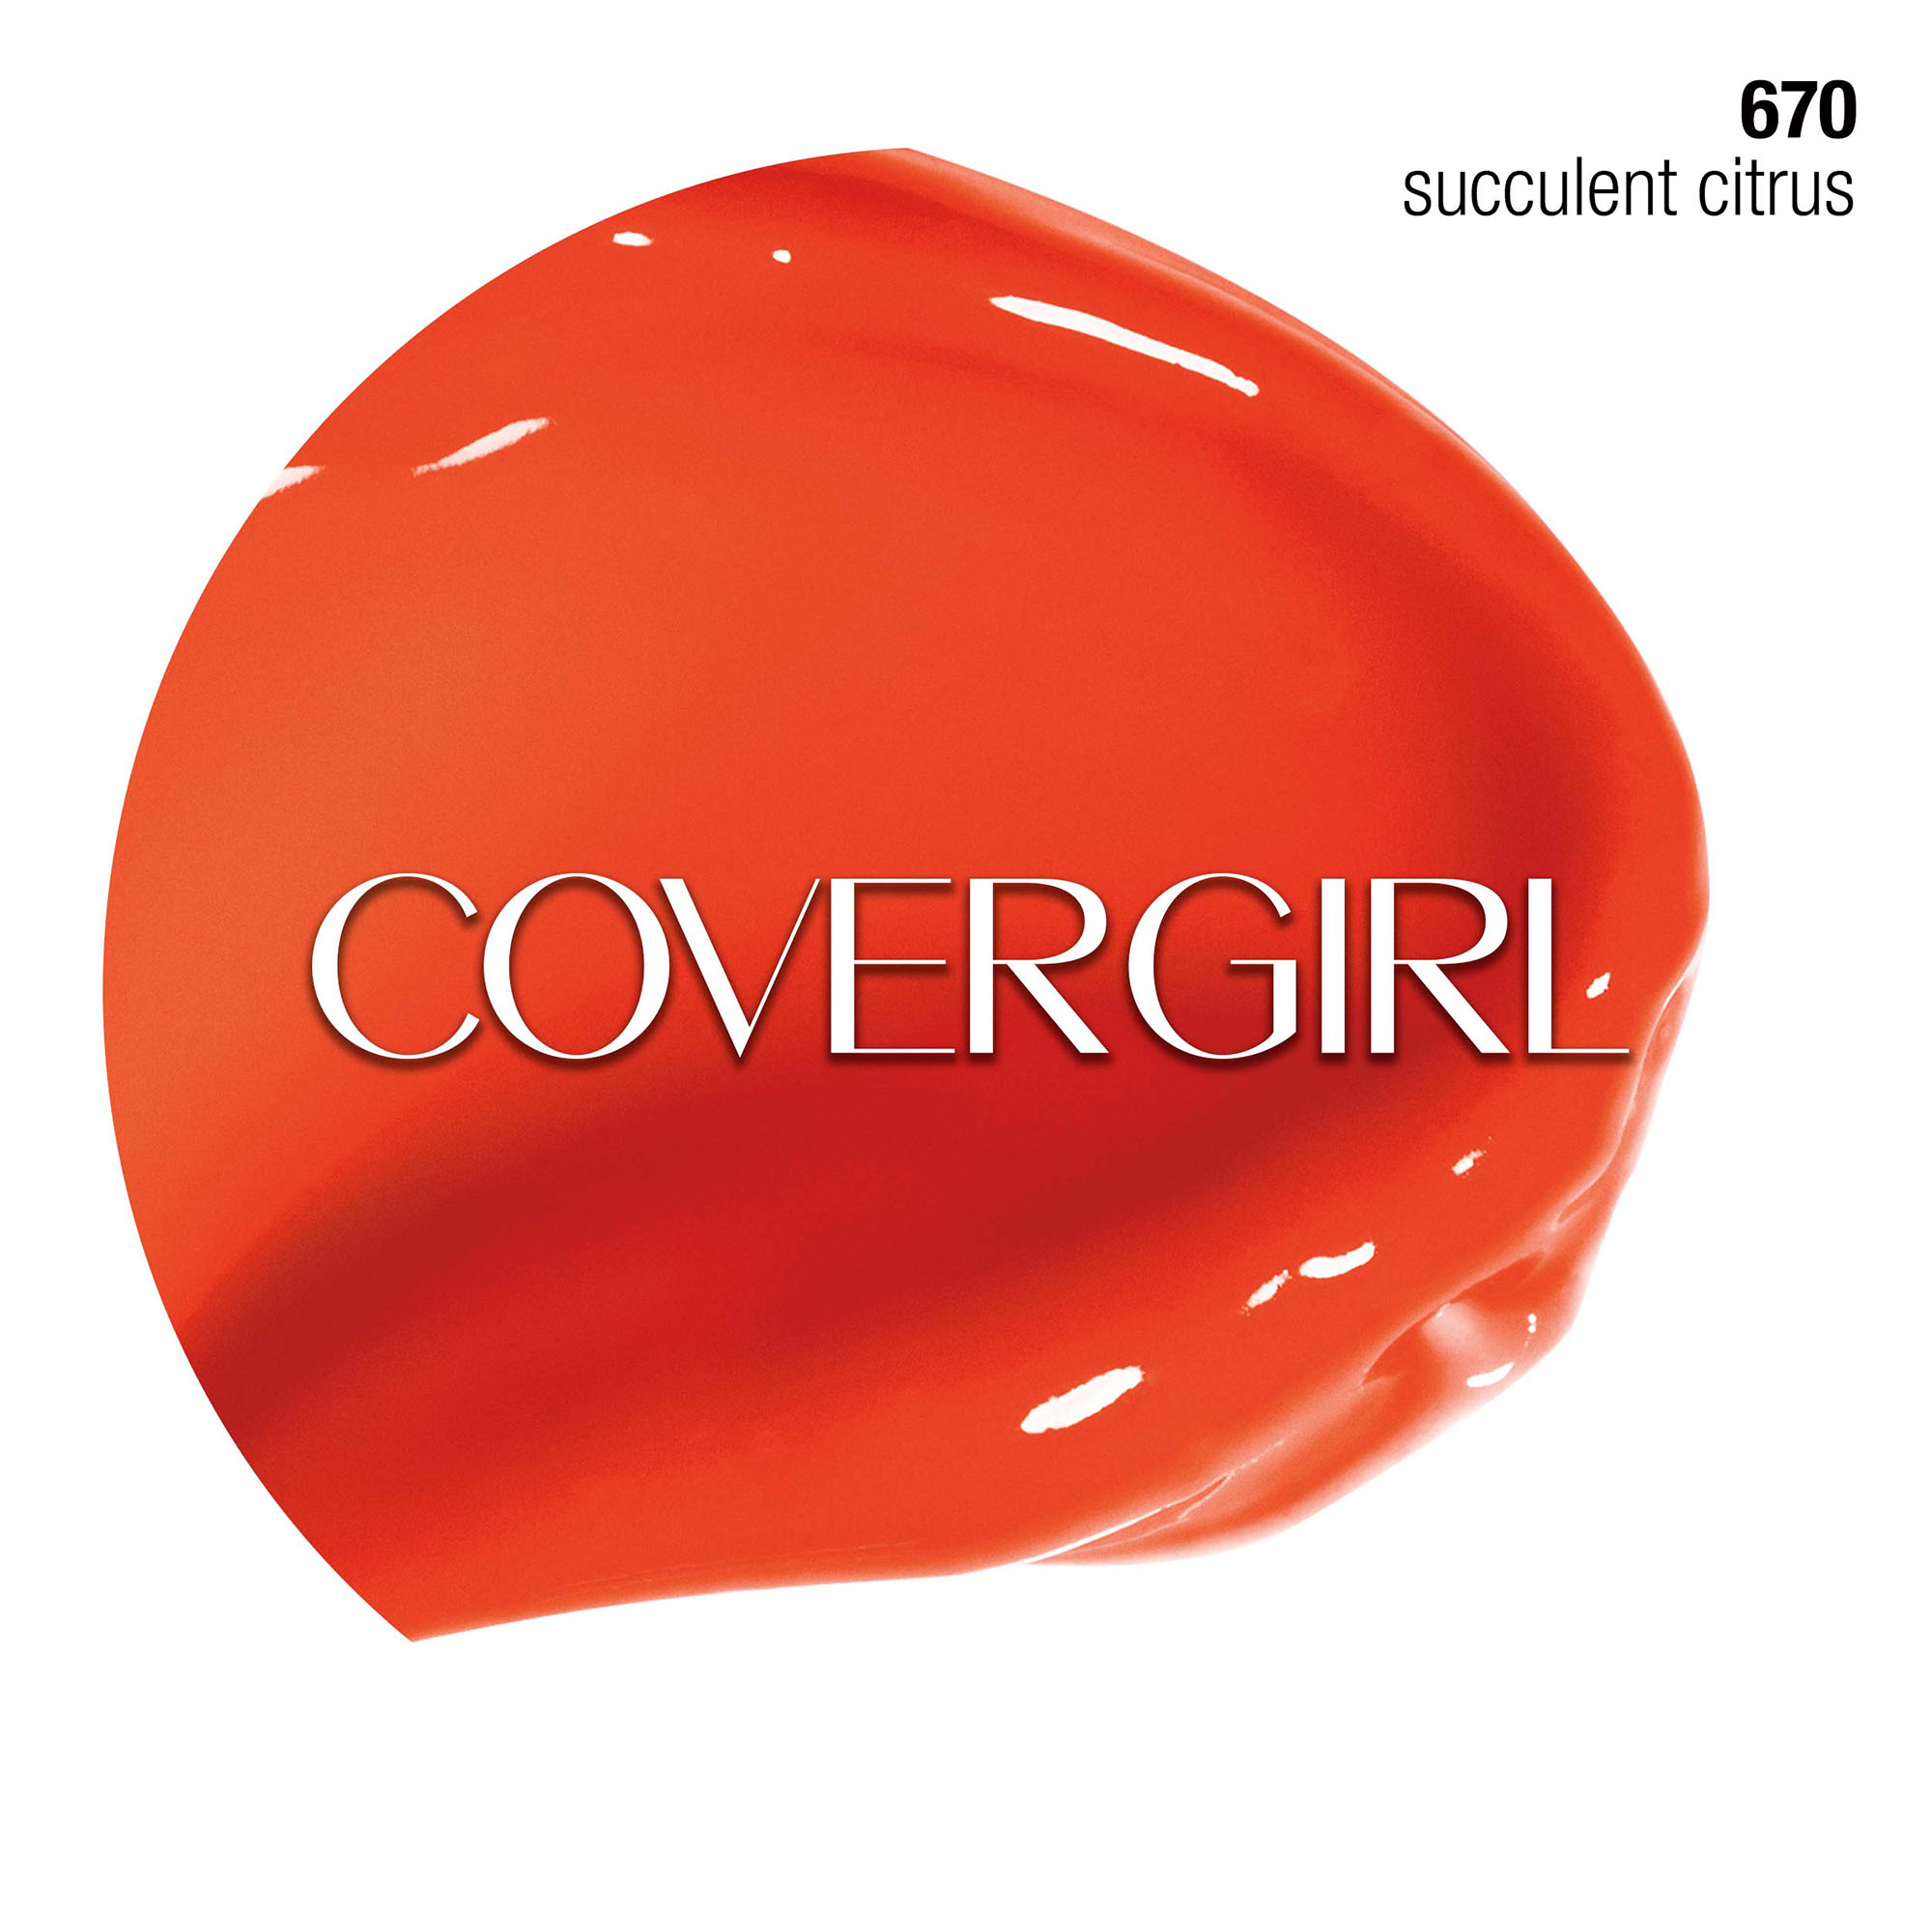 COVERGIRL Colorlicious High Shine Lip Gloss, 670 Succulent Citrus - image 5 of 5